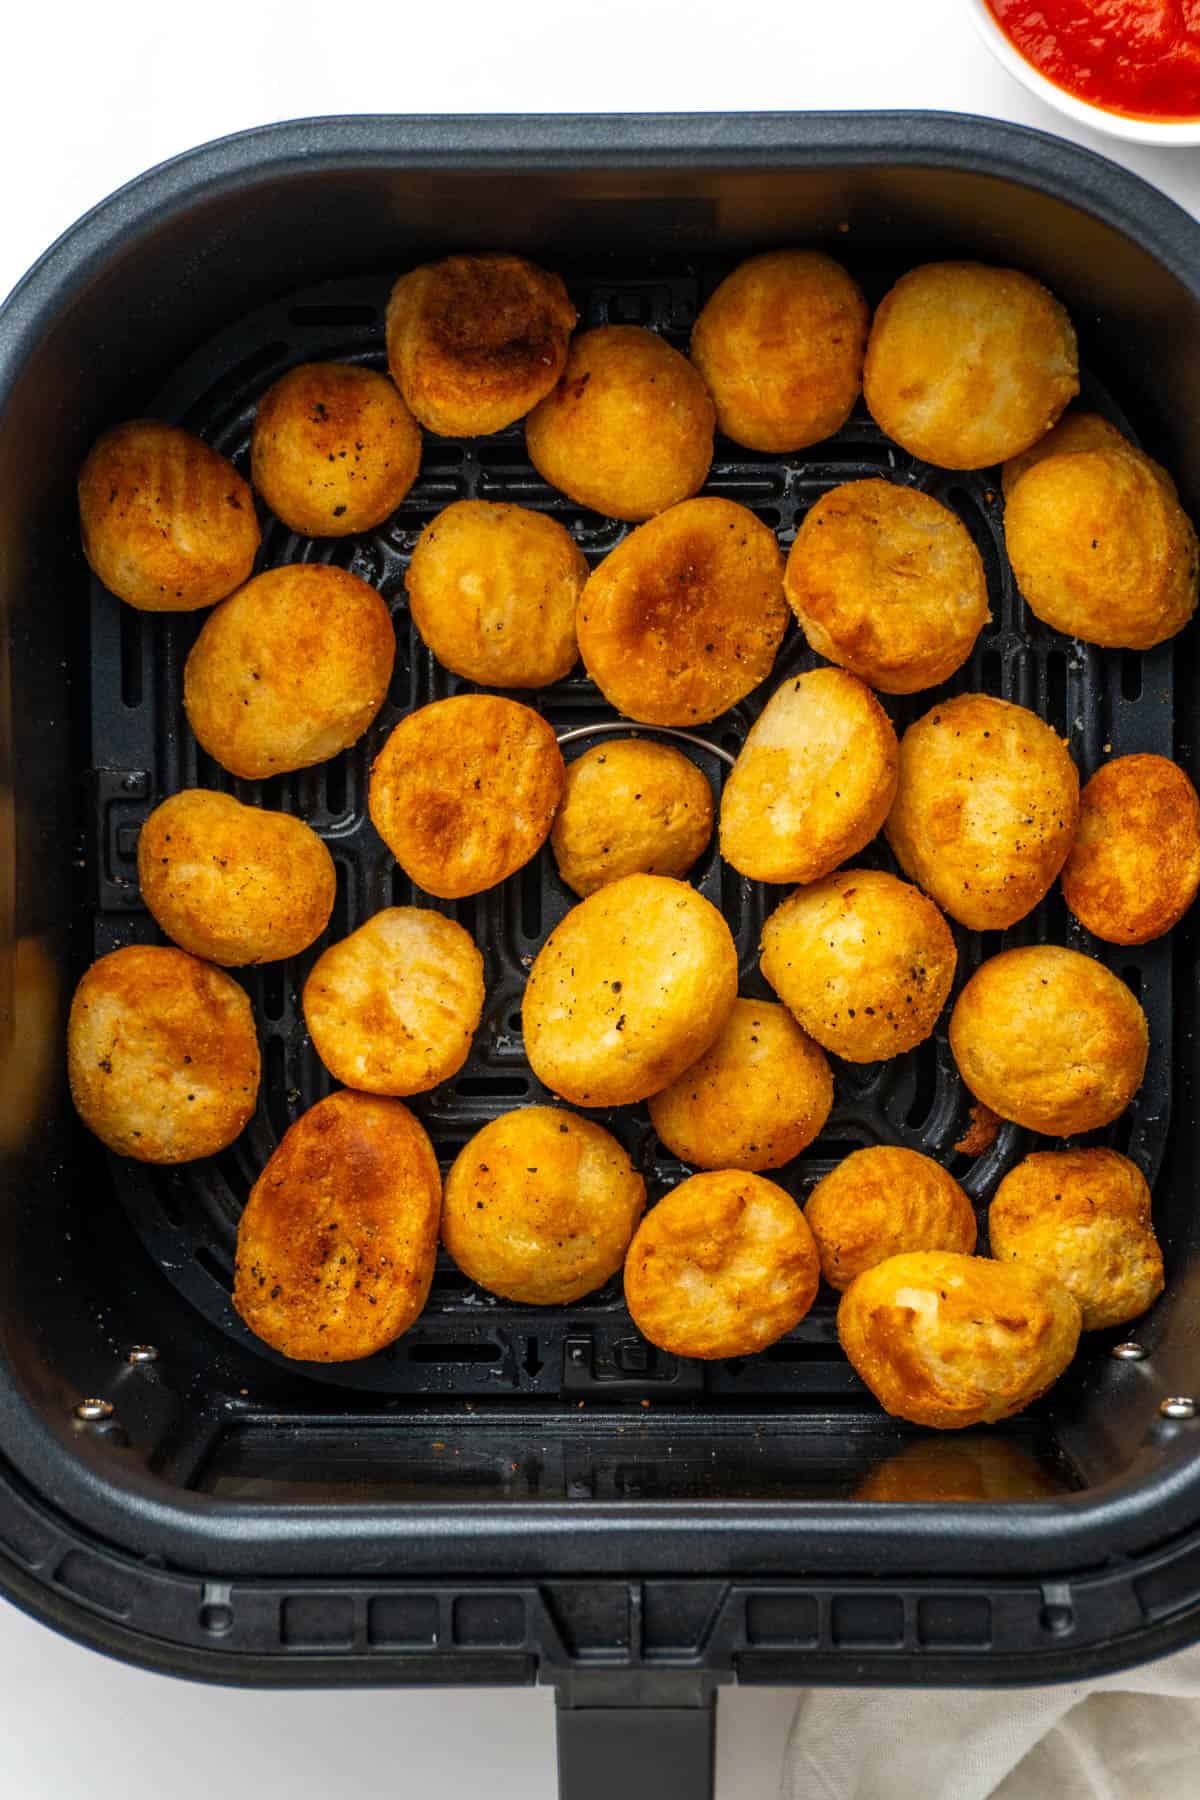 Crispy golden roast potatoes in the air fryer basket after being cooked.